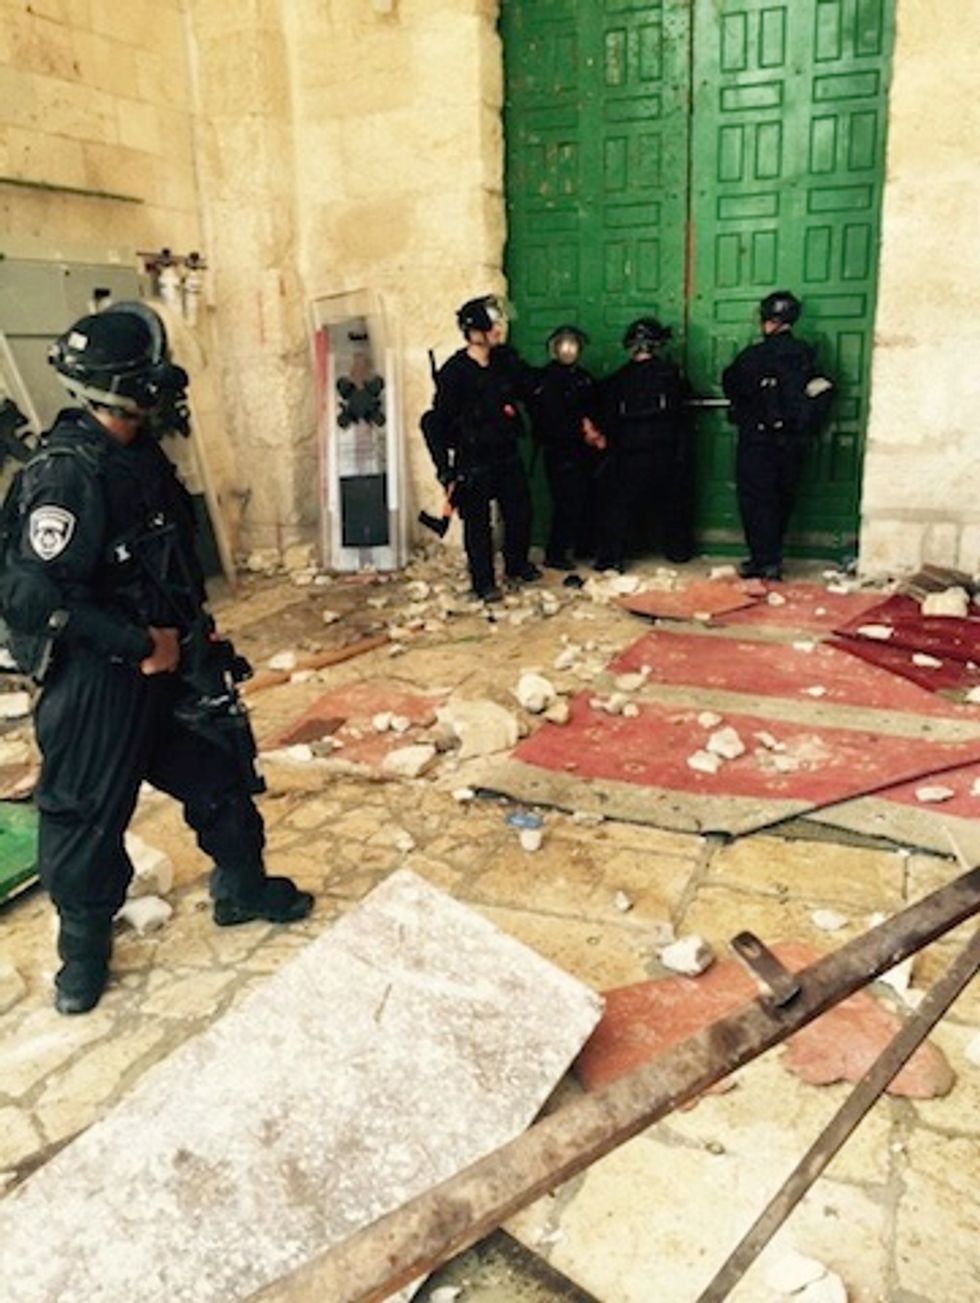 Palestinians Prepared to Attack Jews on the Temple Mount on Holiday Marking the Destruction of the Holy Temples